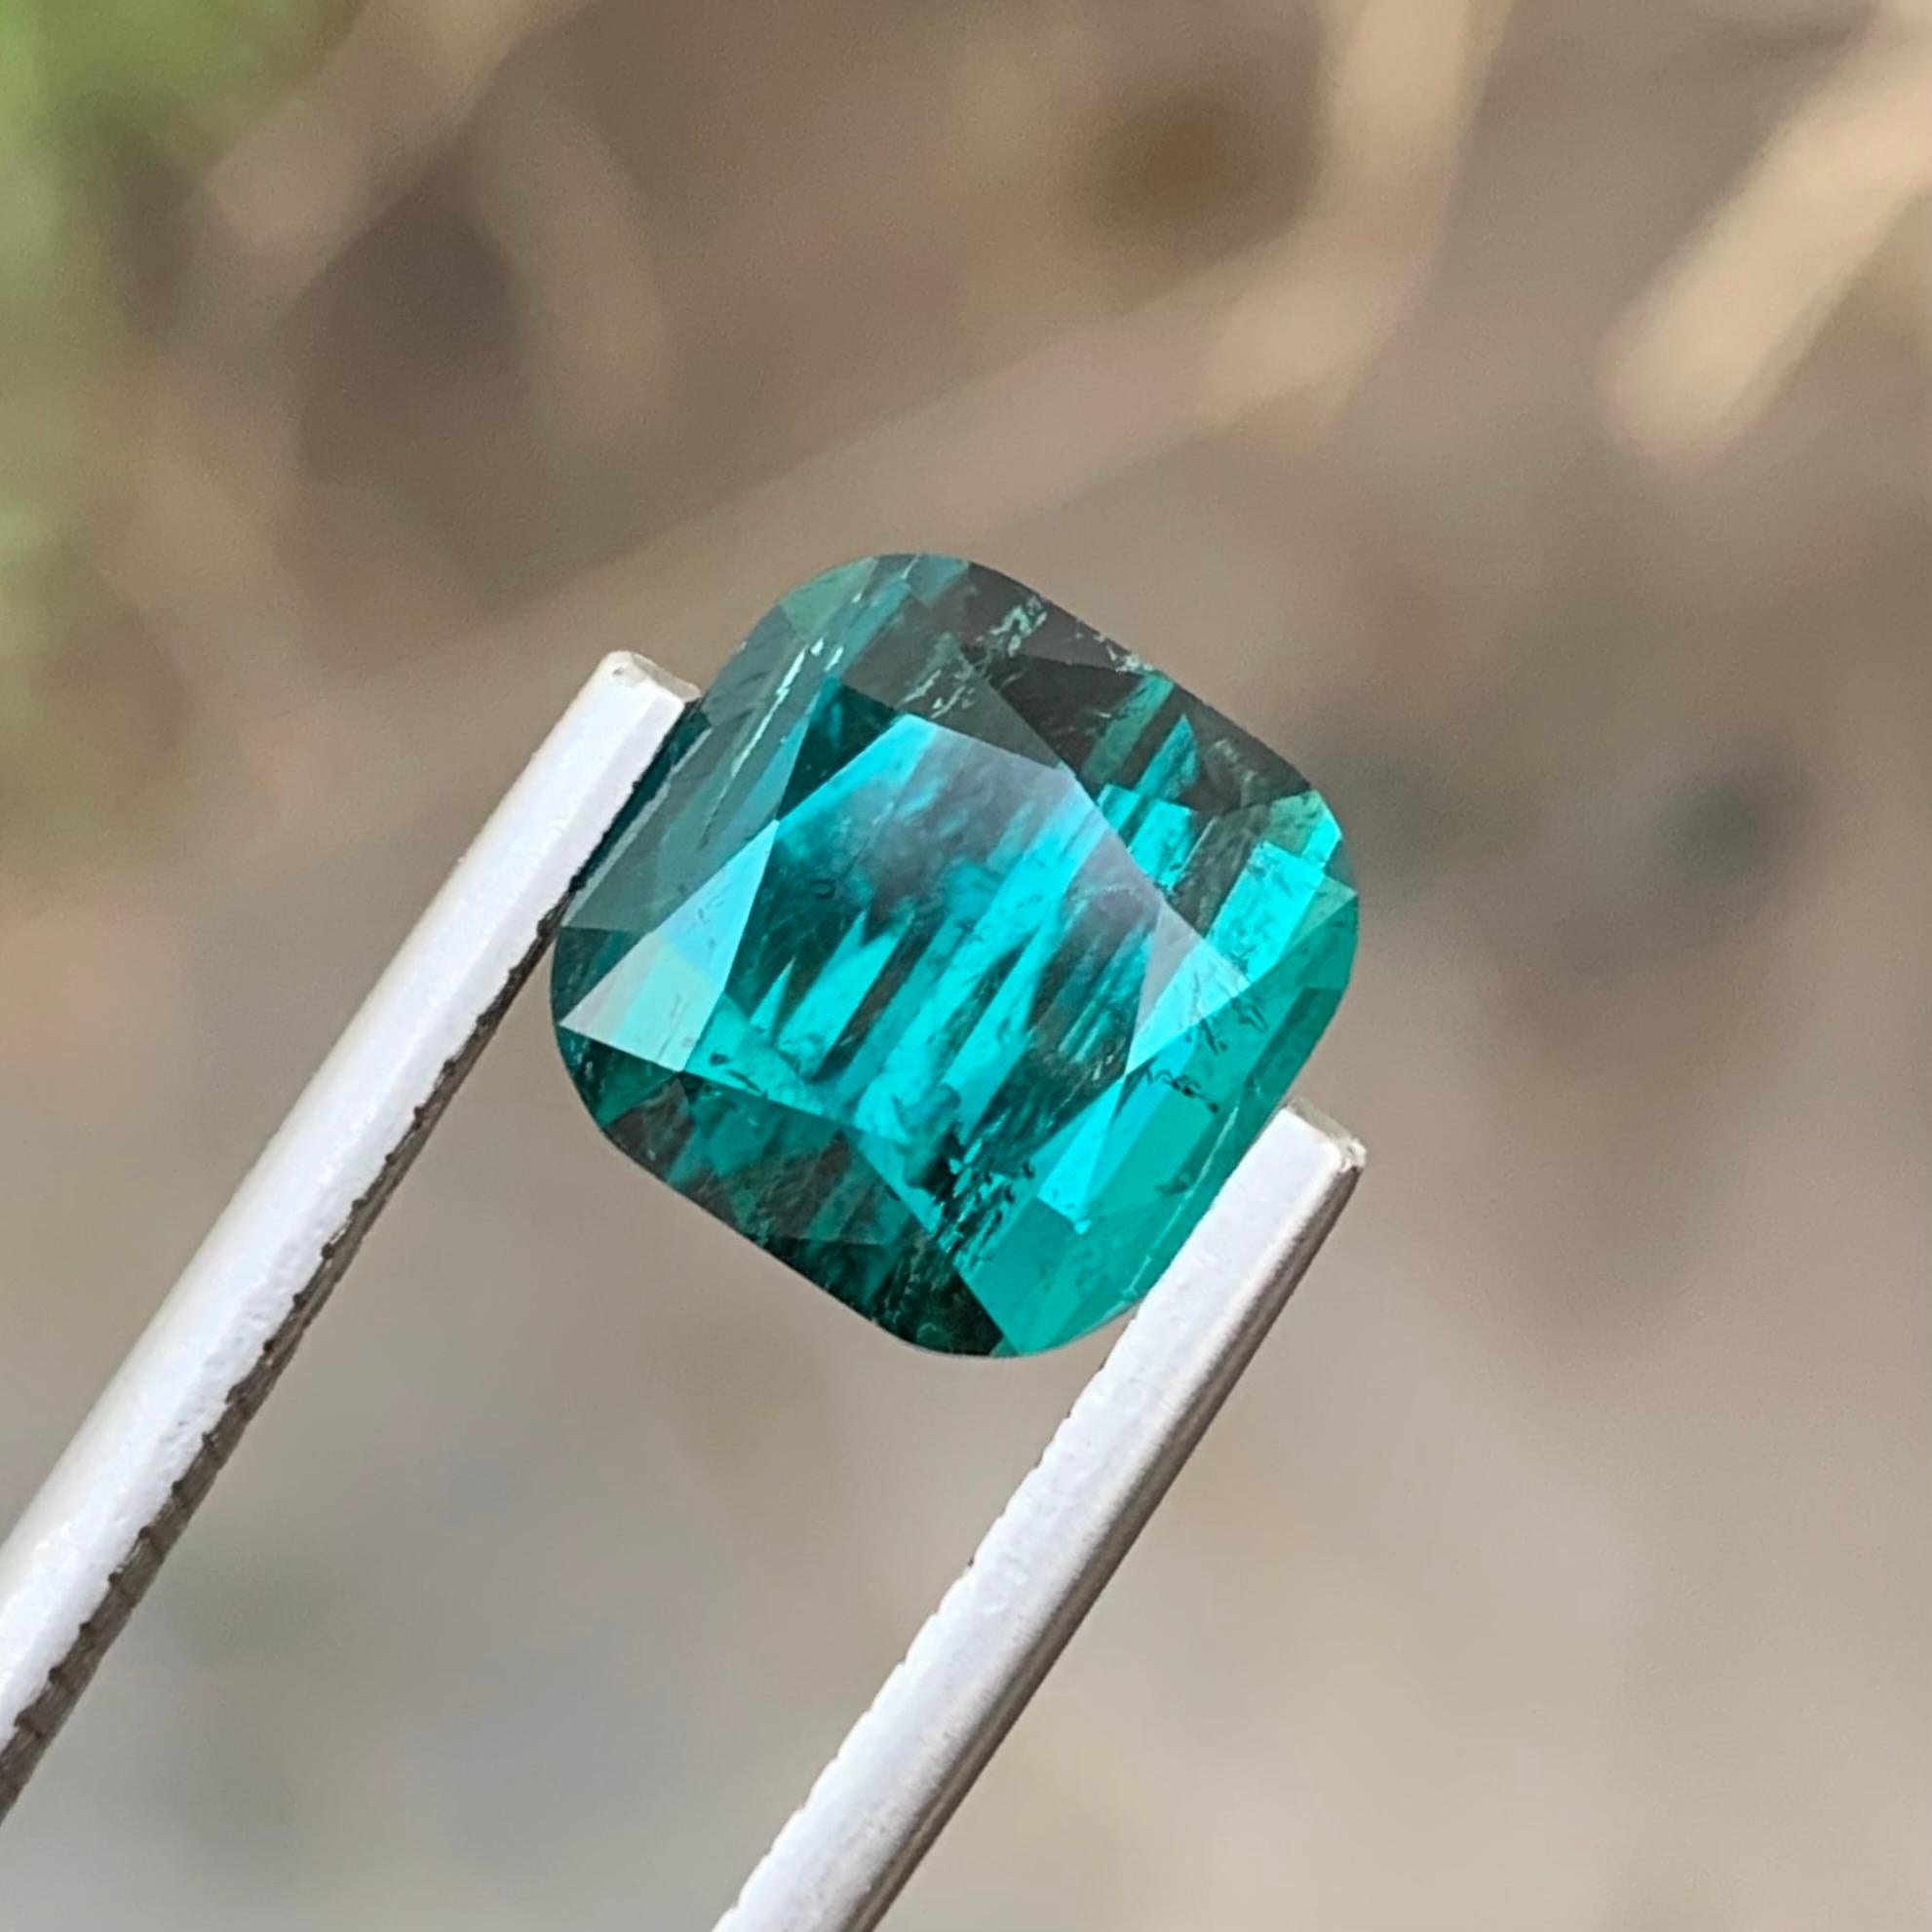 Loose Tourmaline 
Weight: 5 Carats 
Dimension: 9.1x9.1x7 Mm
Origin: Kunar Afghanistan 
Shape: Cushion
Color: Lagoon
Treatment: Non
Clarity: Small Included
Lagoon Tourmaline is a mesmerizing gemstone renowned for its captivating color spectrum.